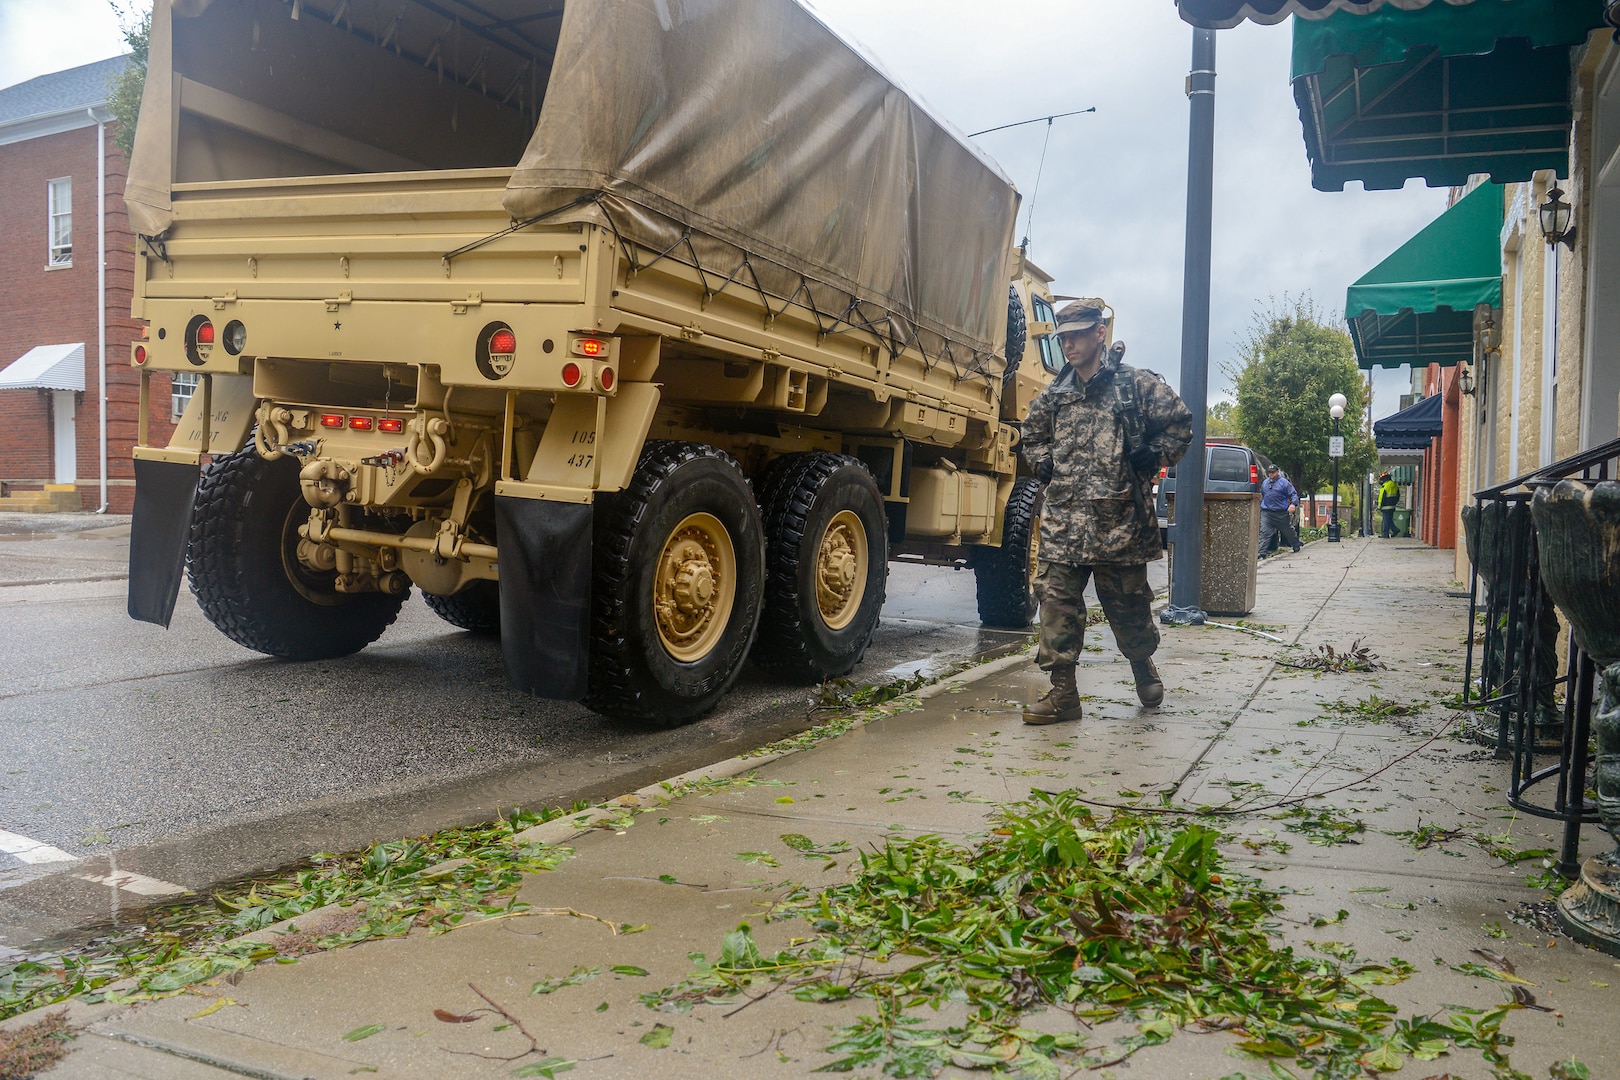 South Carolina National Guard Soldiers and Bennettsville, S.C., law enforcement work together to help the local community evacuate as flooding caused by Tropical Storm Florence forces people from their home, Sept.16, 2018. Approximately 3,400 Soldiers and Airmen have been mobilized to prepare, respond and participate in recovery efforts as Tropical Storm Florence has caused flooding and damage to the state.